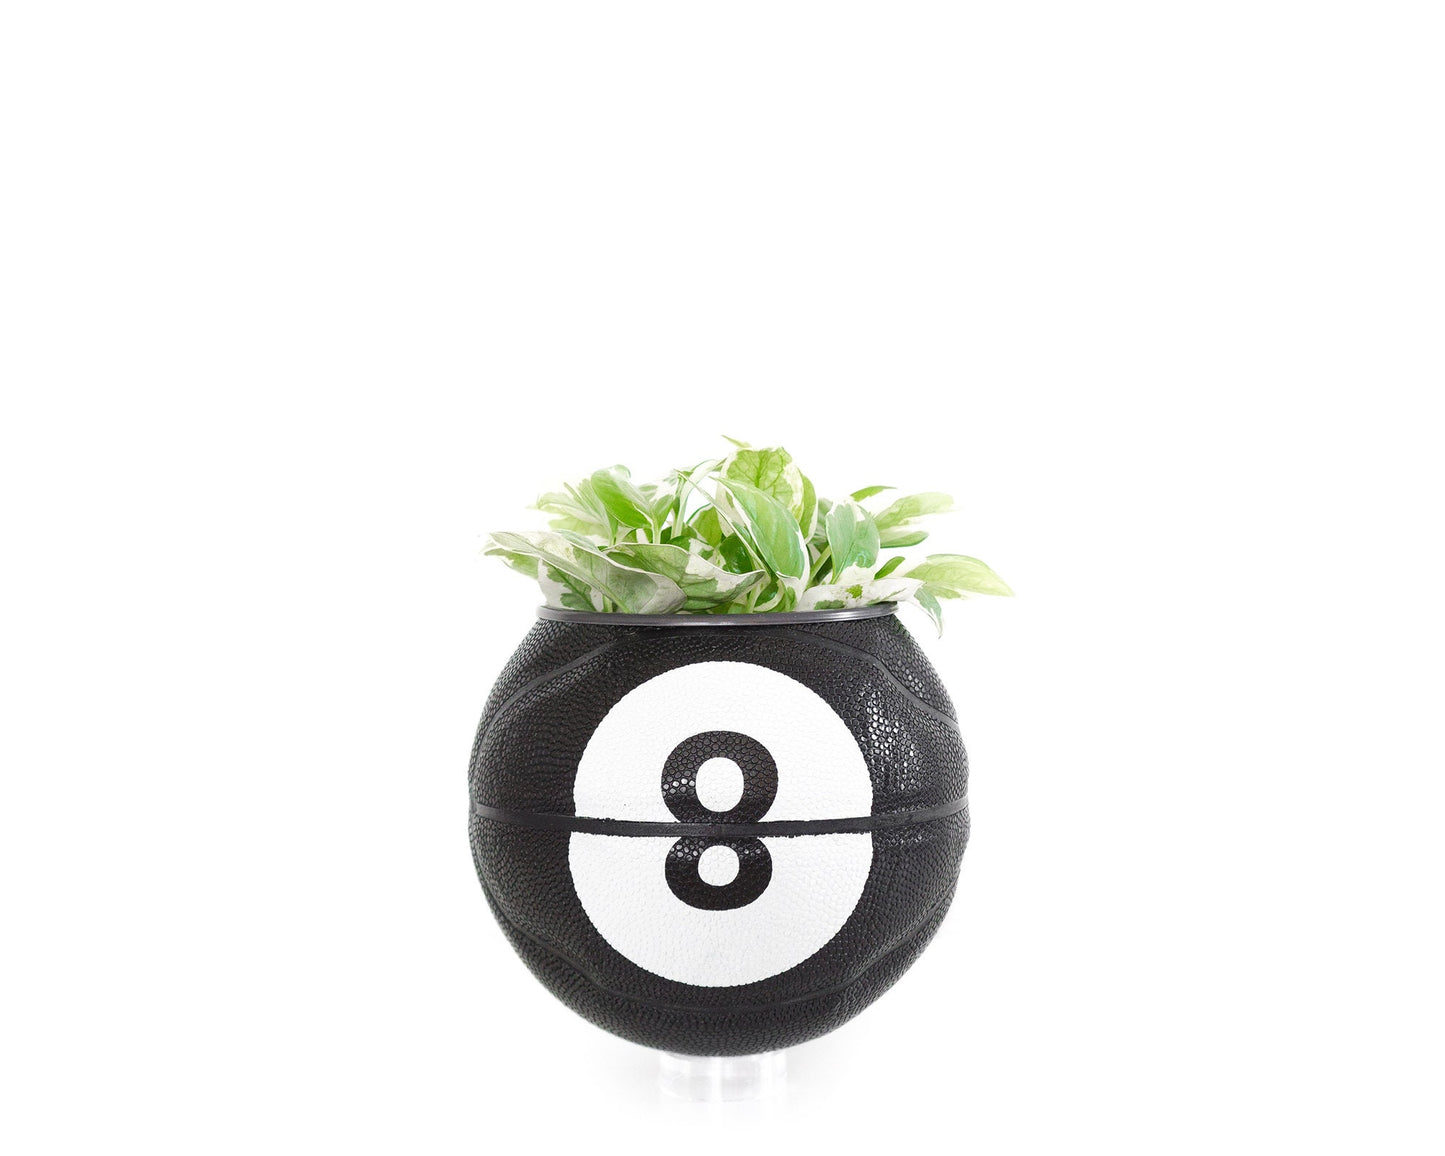 plntrs - ROKIT 8 Ball  Mini Basketball Planter - new ball with stand